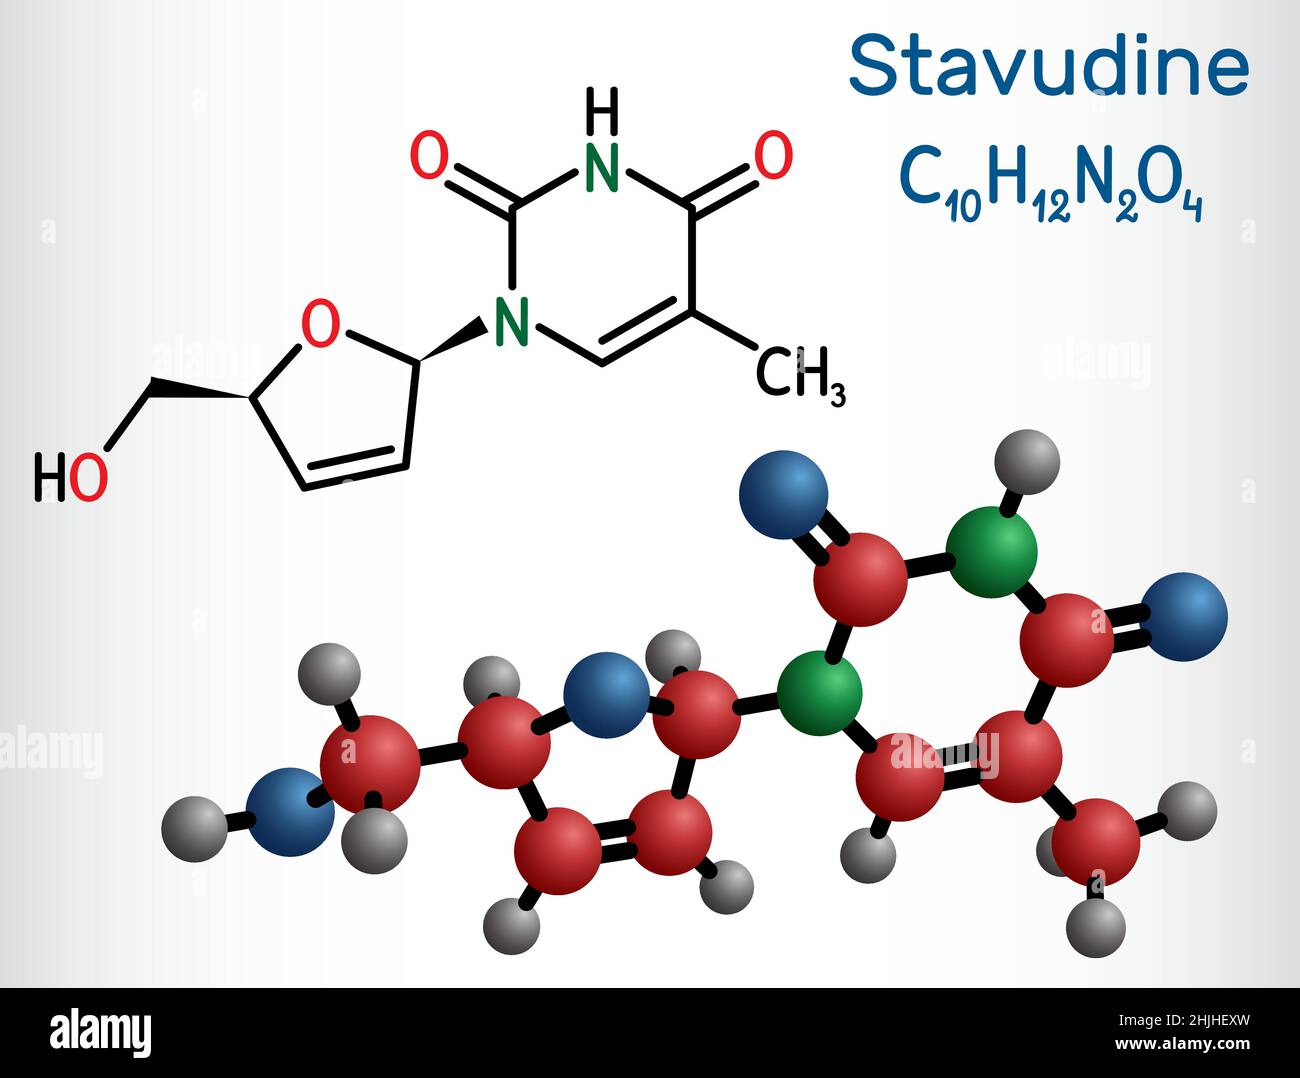 Stavudine, d4T molecule. It is dideoxynucleoside used in the treatment of HIV infection and acquired immunodeficiency syndrome AIDS. Structural chemic Stock Vector